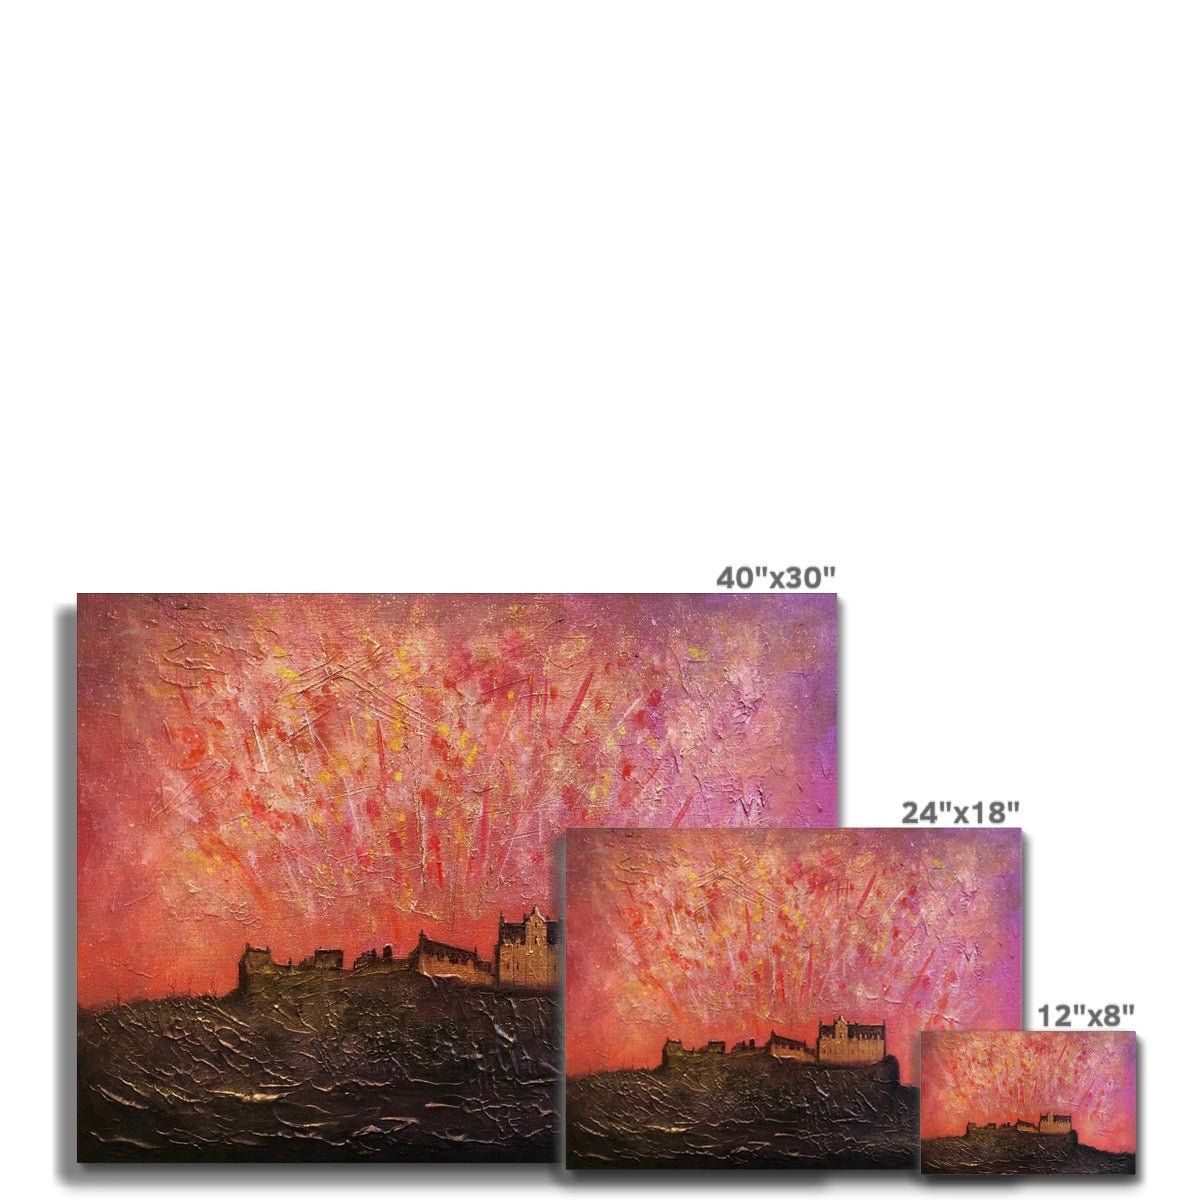 Edinburgh Castle Fireworks Painting | Canvas From Scotland-Contemporary Stretched Canvas Prints-Edinburgh & Glasgow Art Gallery-Paintings, Prints, Homeware, Art Gifts From Scotland By Scottish Artist Kevin Hunter